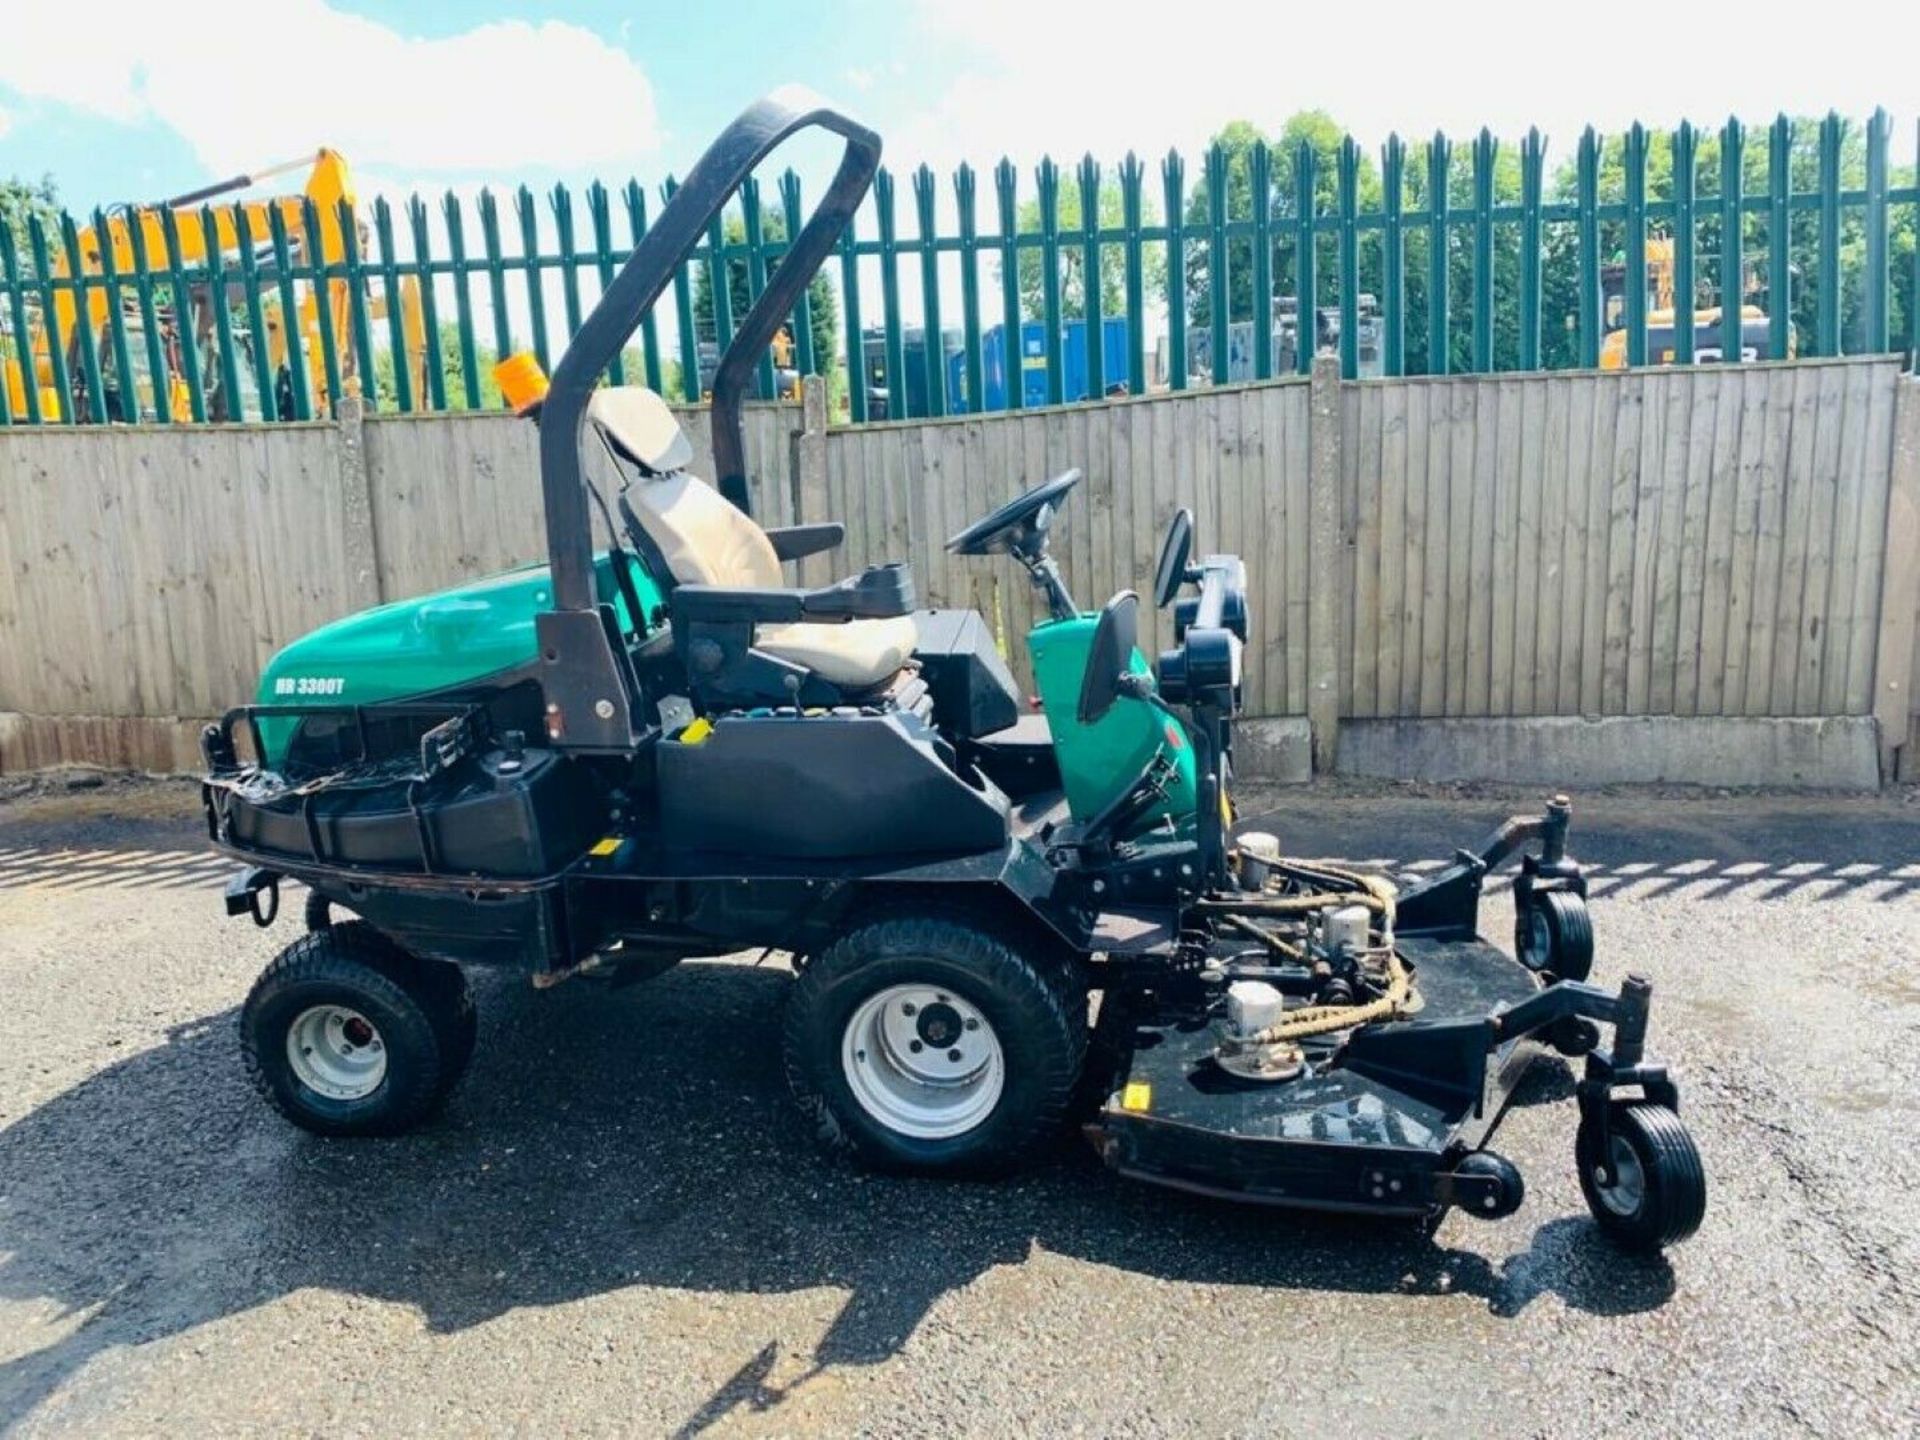 Ransomes HR3300T Rotary Mower (2009) - Image 2 of 7